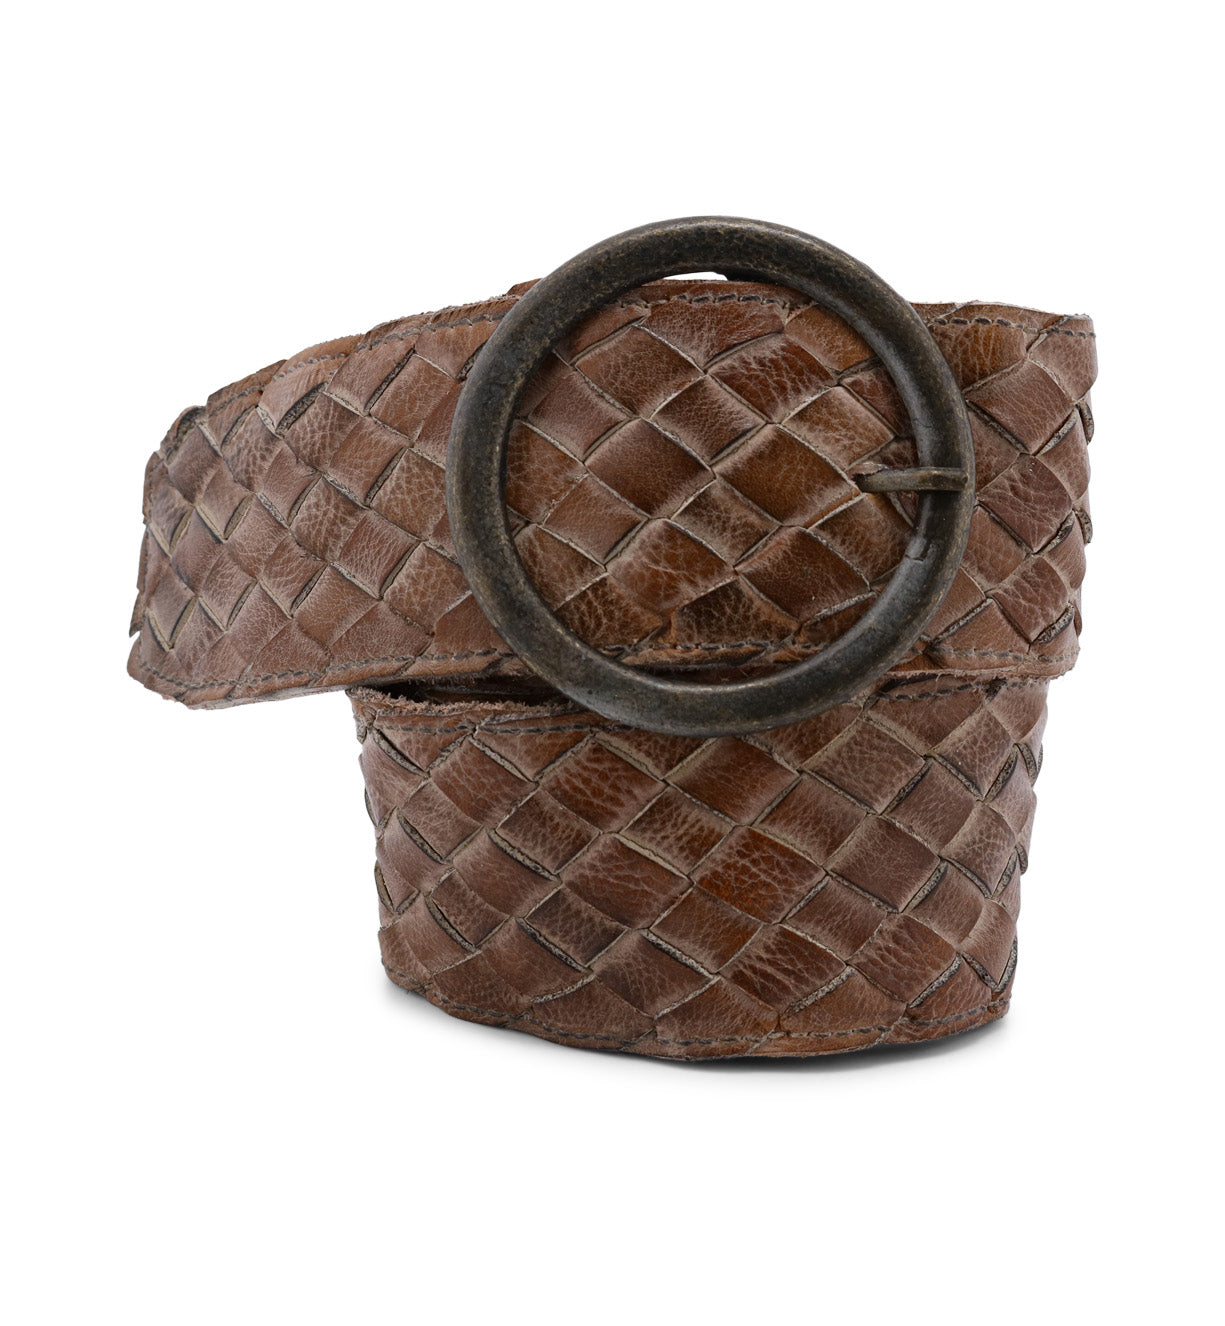 A Dreamweaver brown leather belt with a metal buckle by Bed Stu.